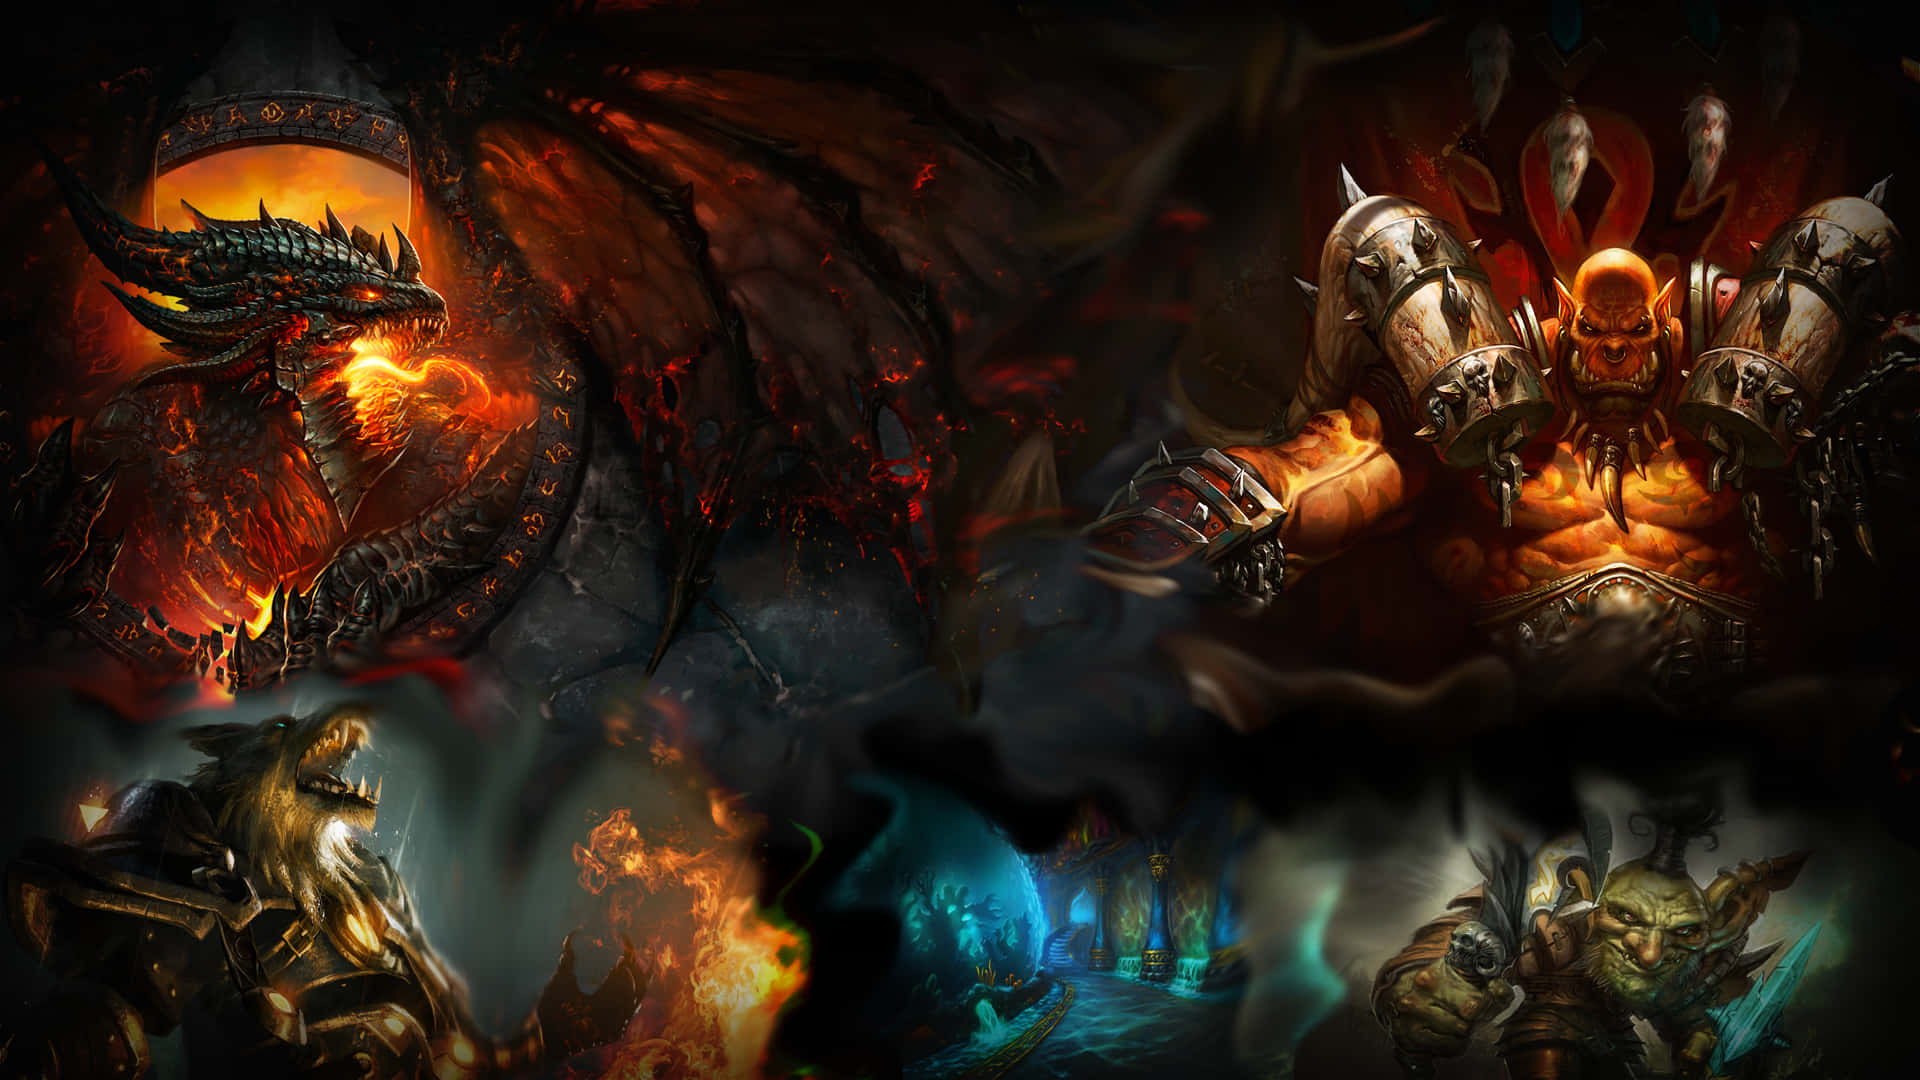 Enter the World of Warcraft at 1920x1080 Wallpaper